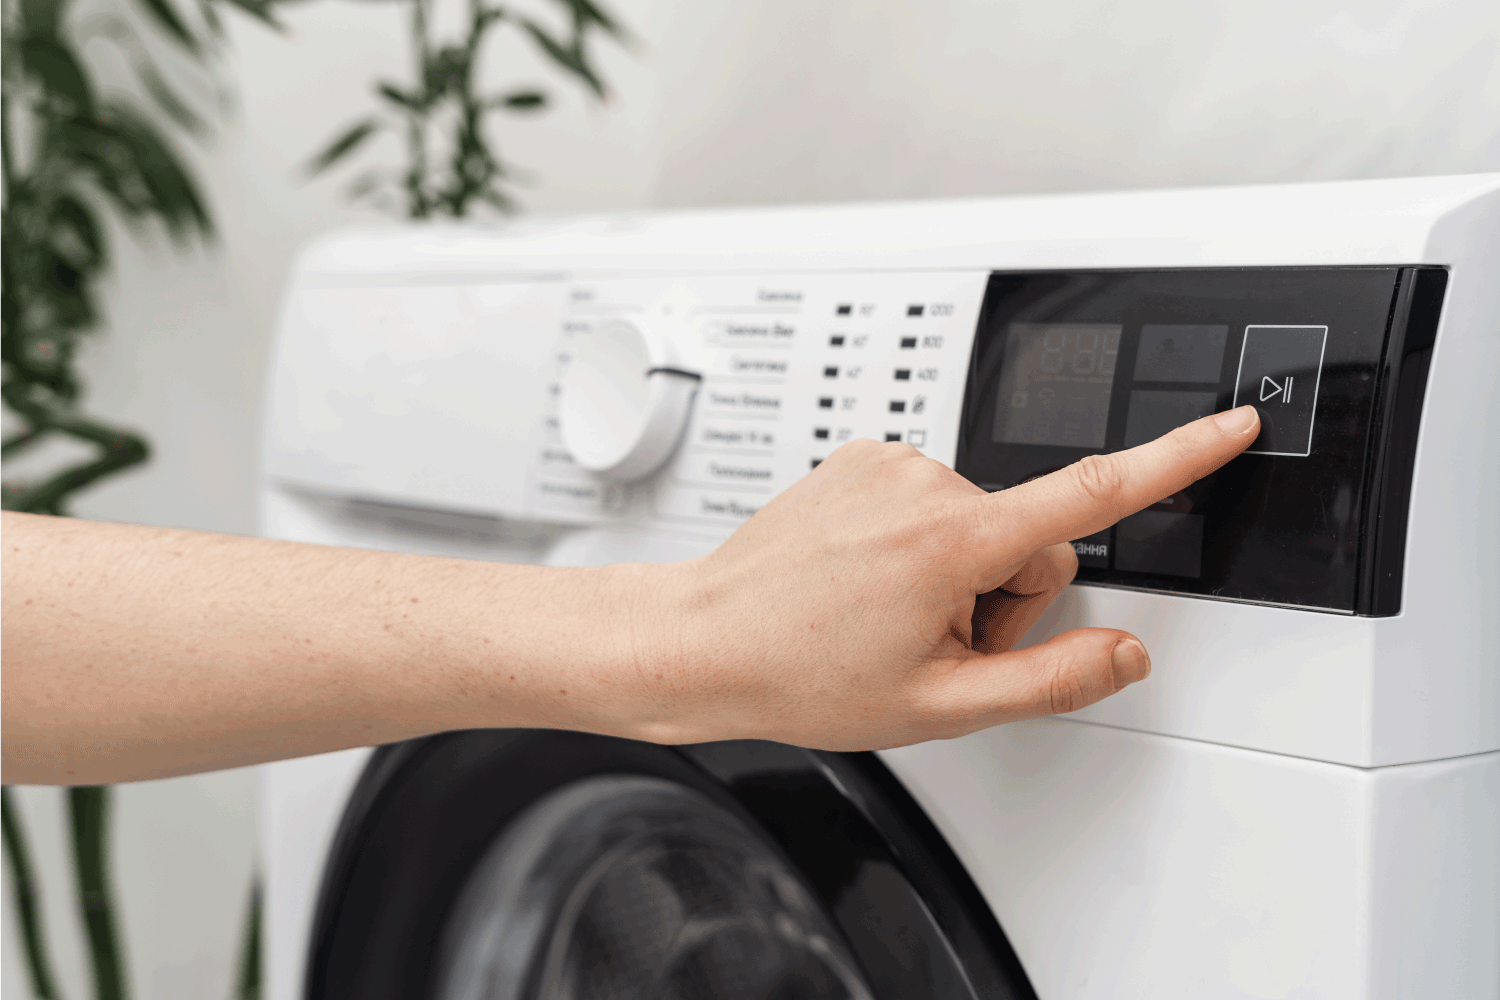 woman hand select settings for laundry on modern digital display. automatic washing machine with touch screen on control panel